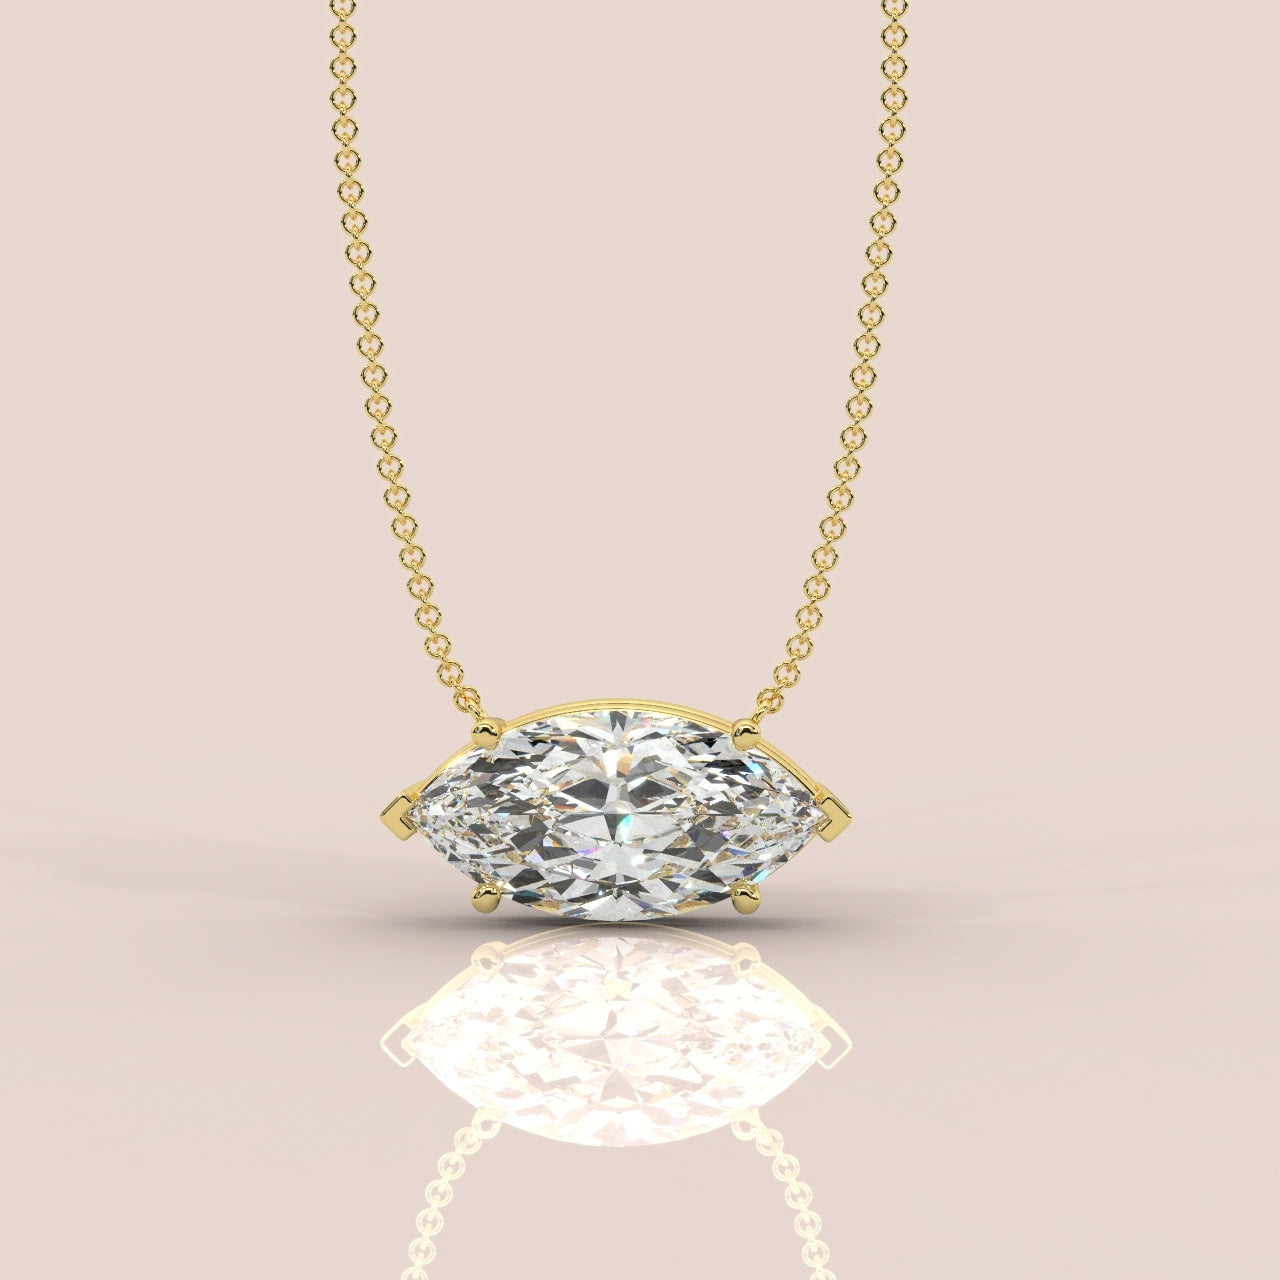 IGI Certified Marquise Diamond Solitaire Pendant Necklace for Women in 18k Gold 1.00Ct